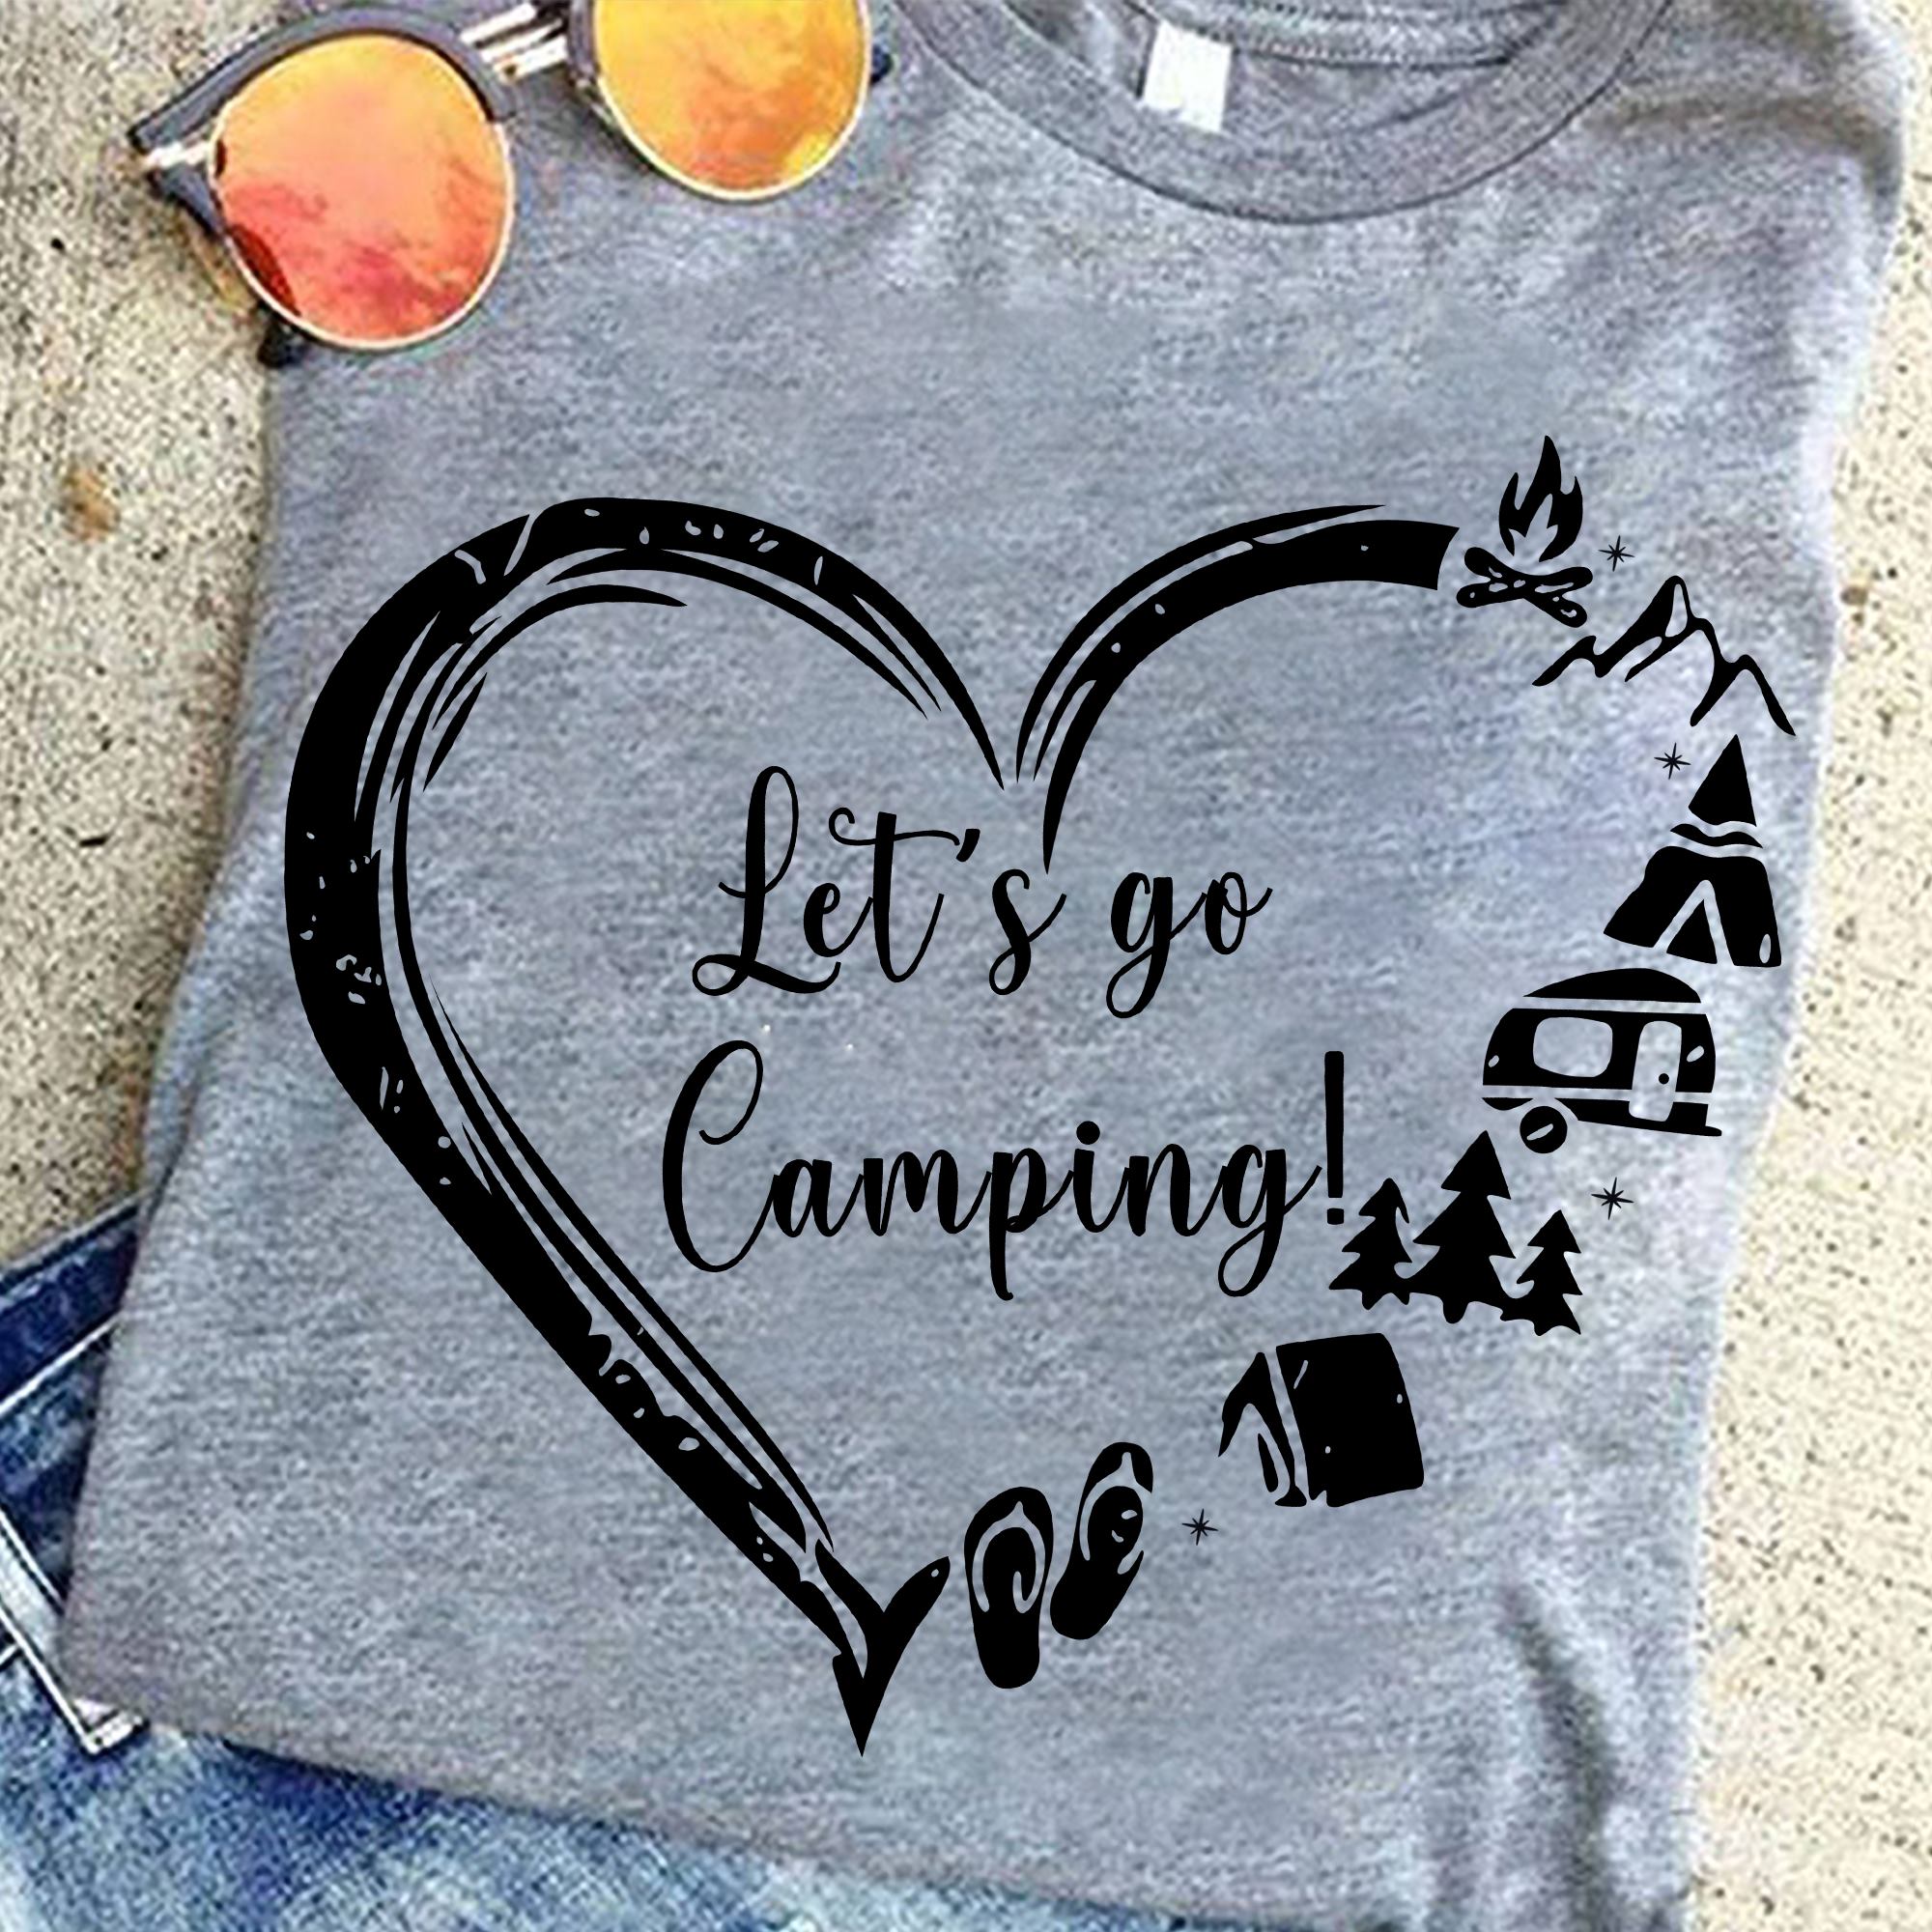 Let's go camping - Love camping